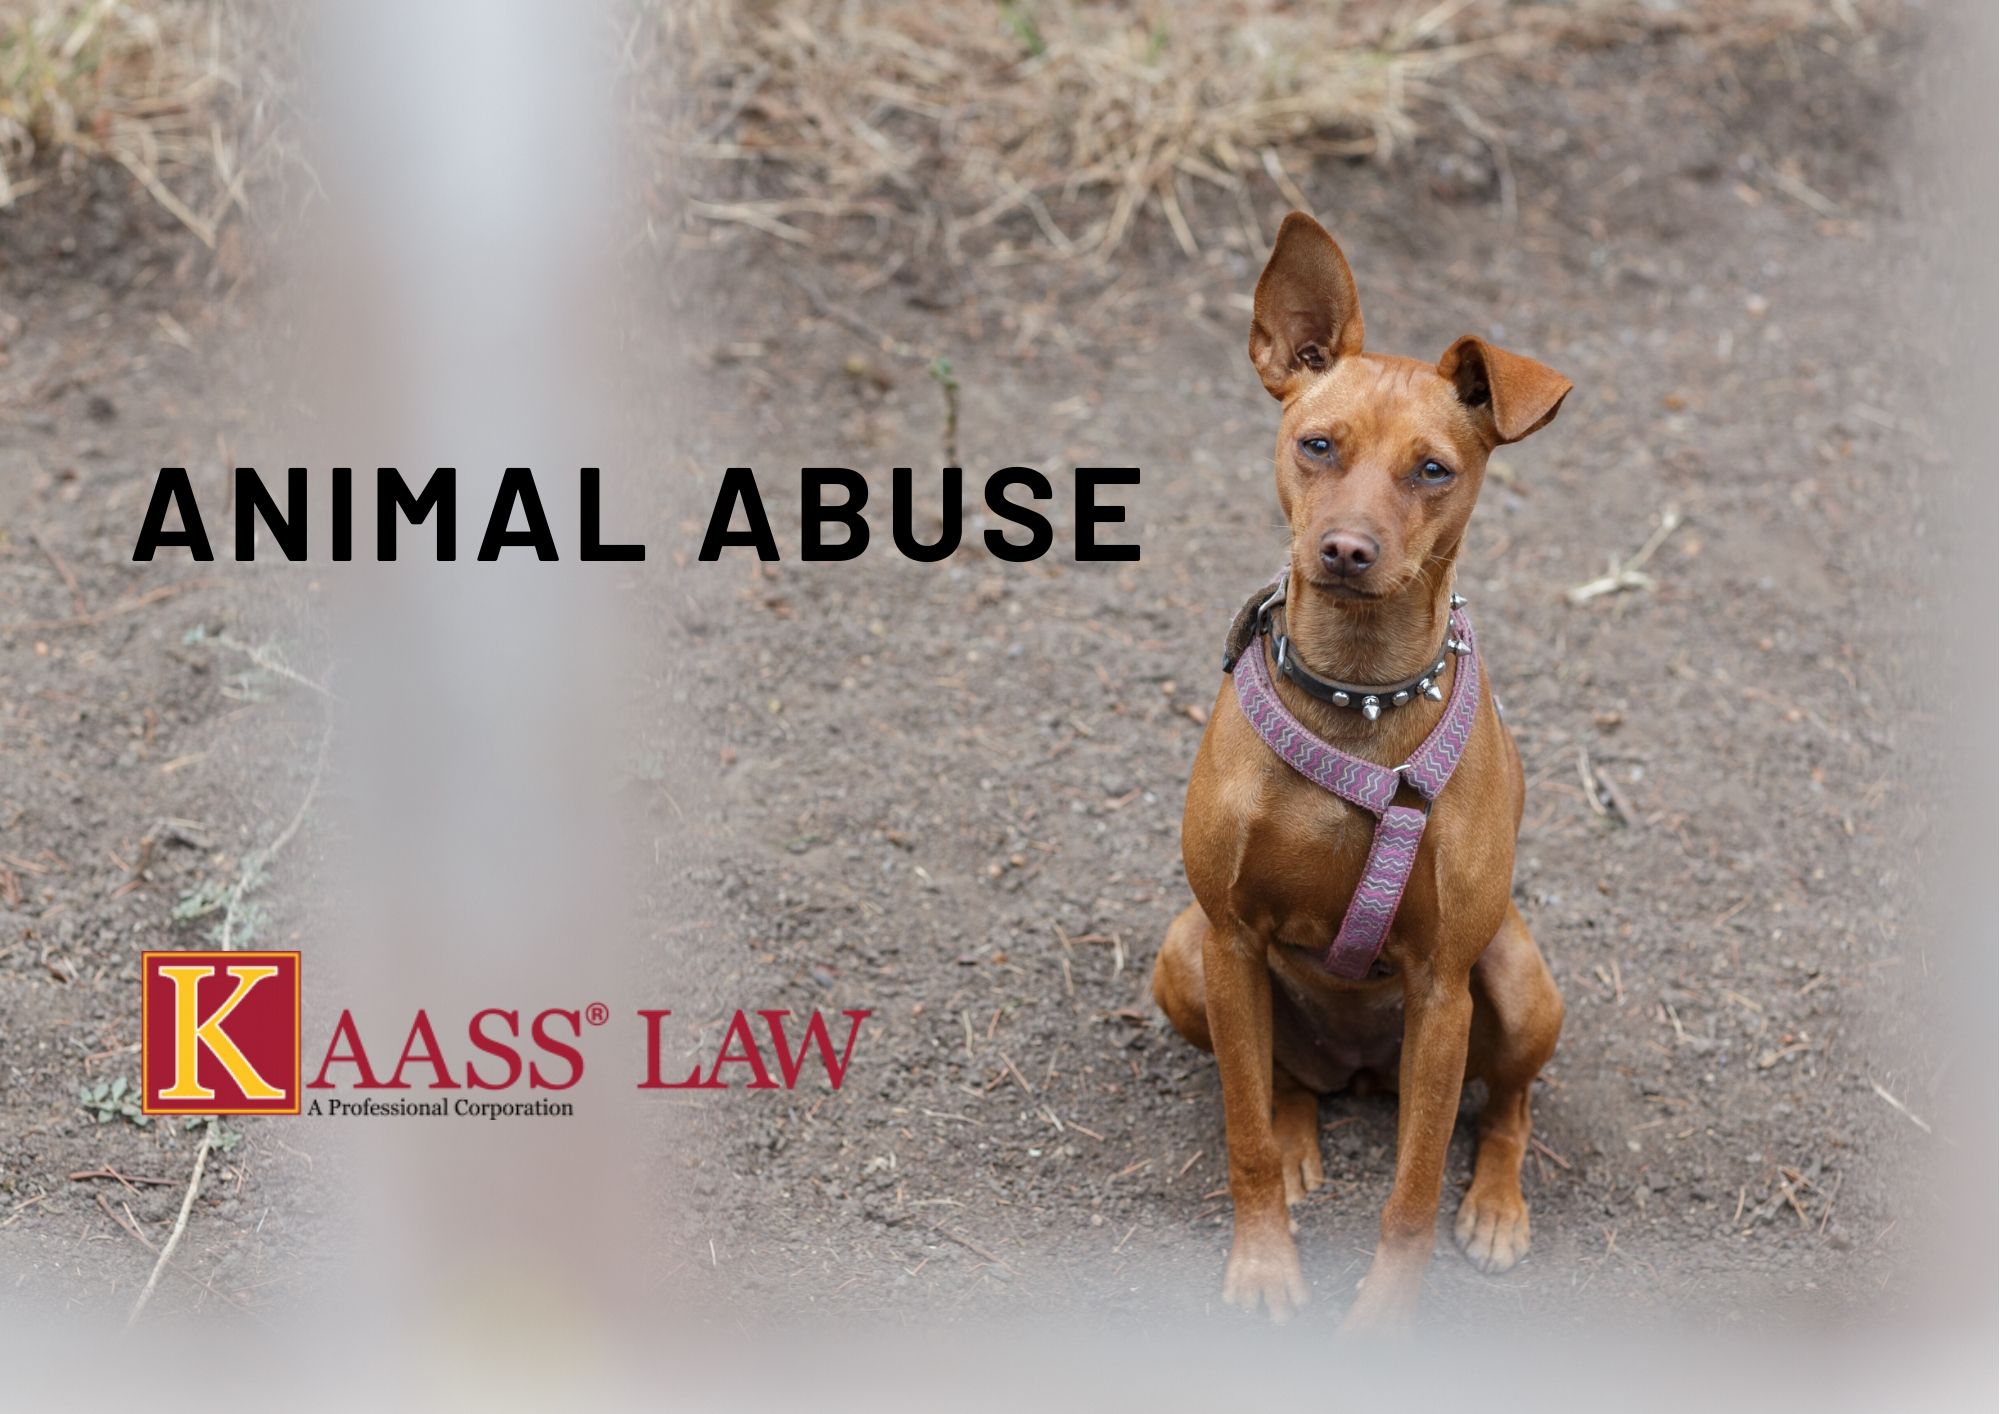 Animal Abuse Laws in California PC 597 - KAASS LAW